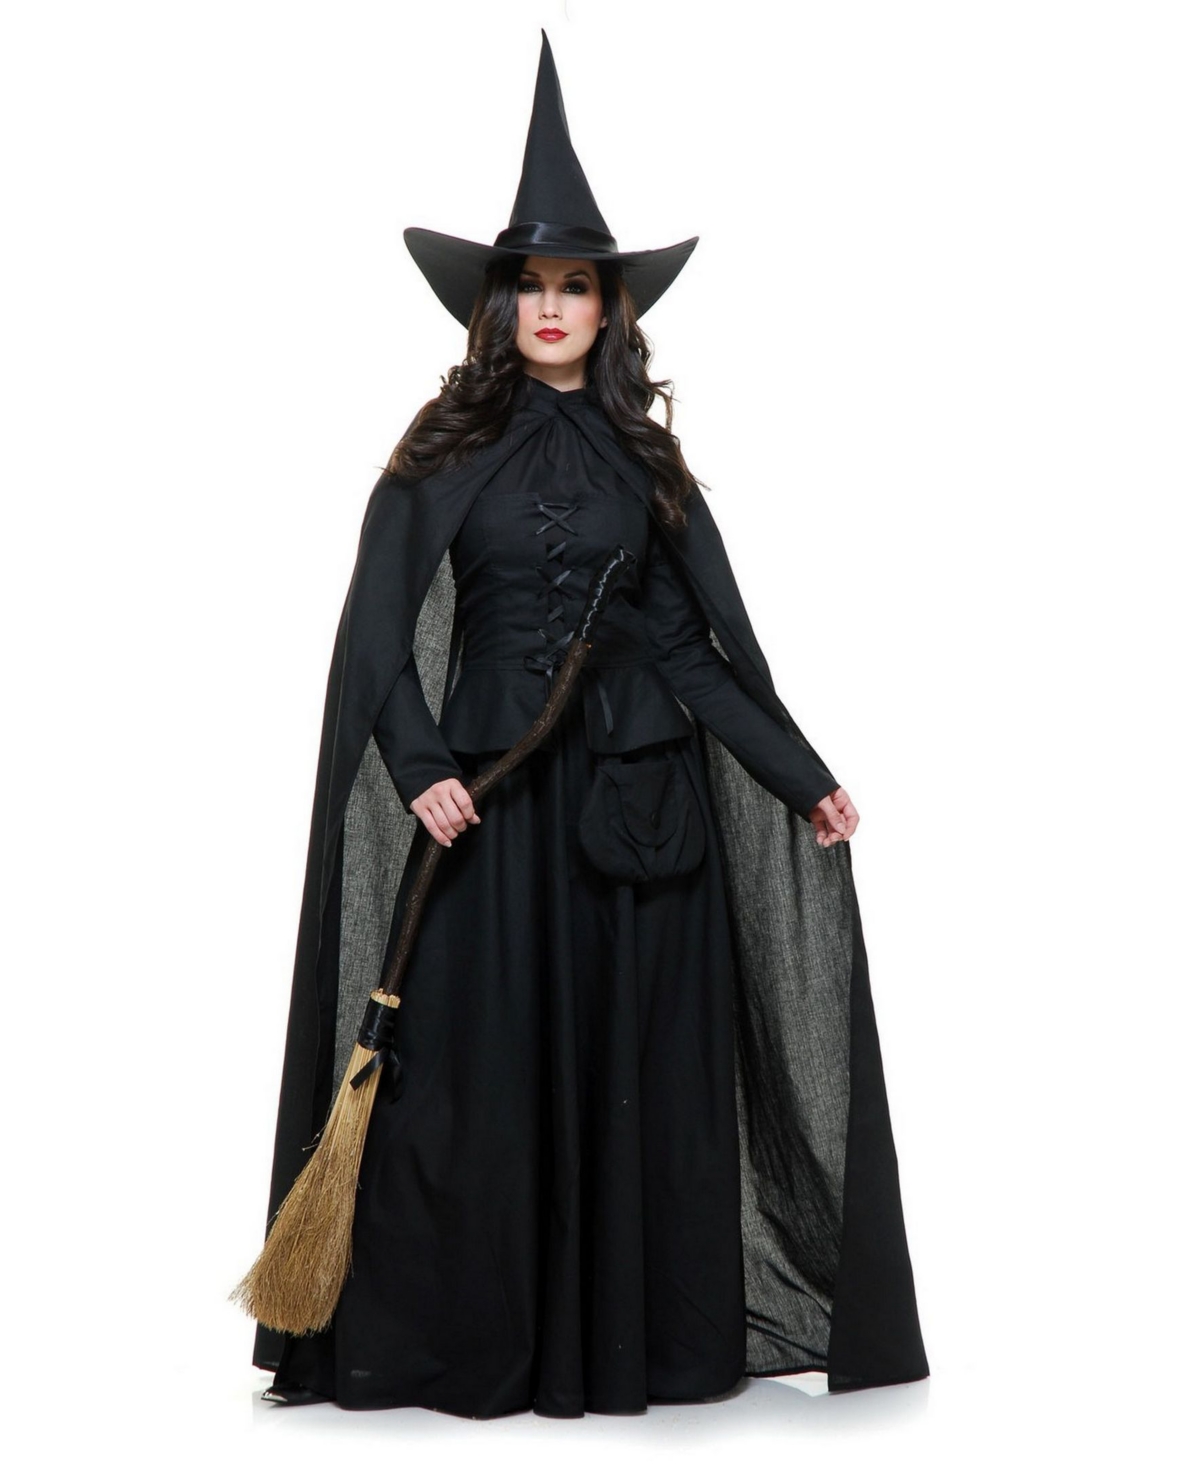 Women's Wicked Witch Adult Costume - Black